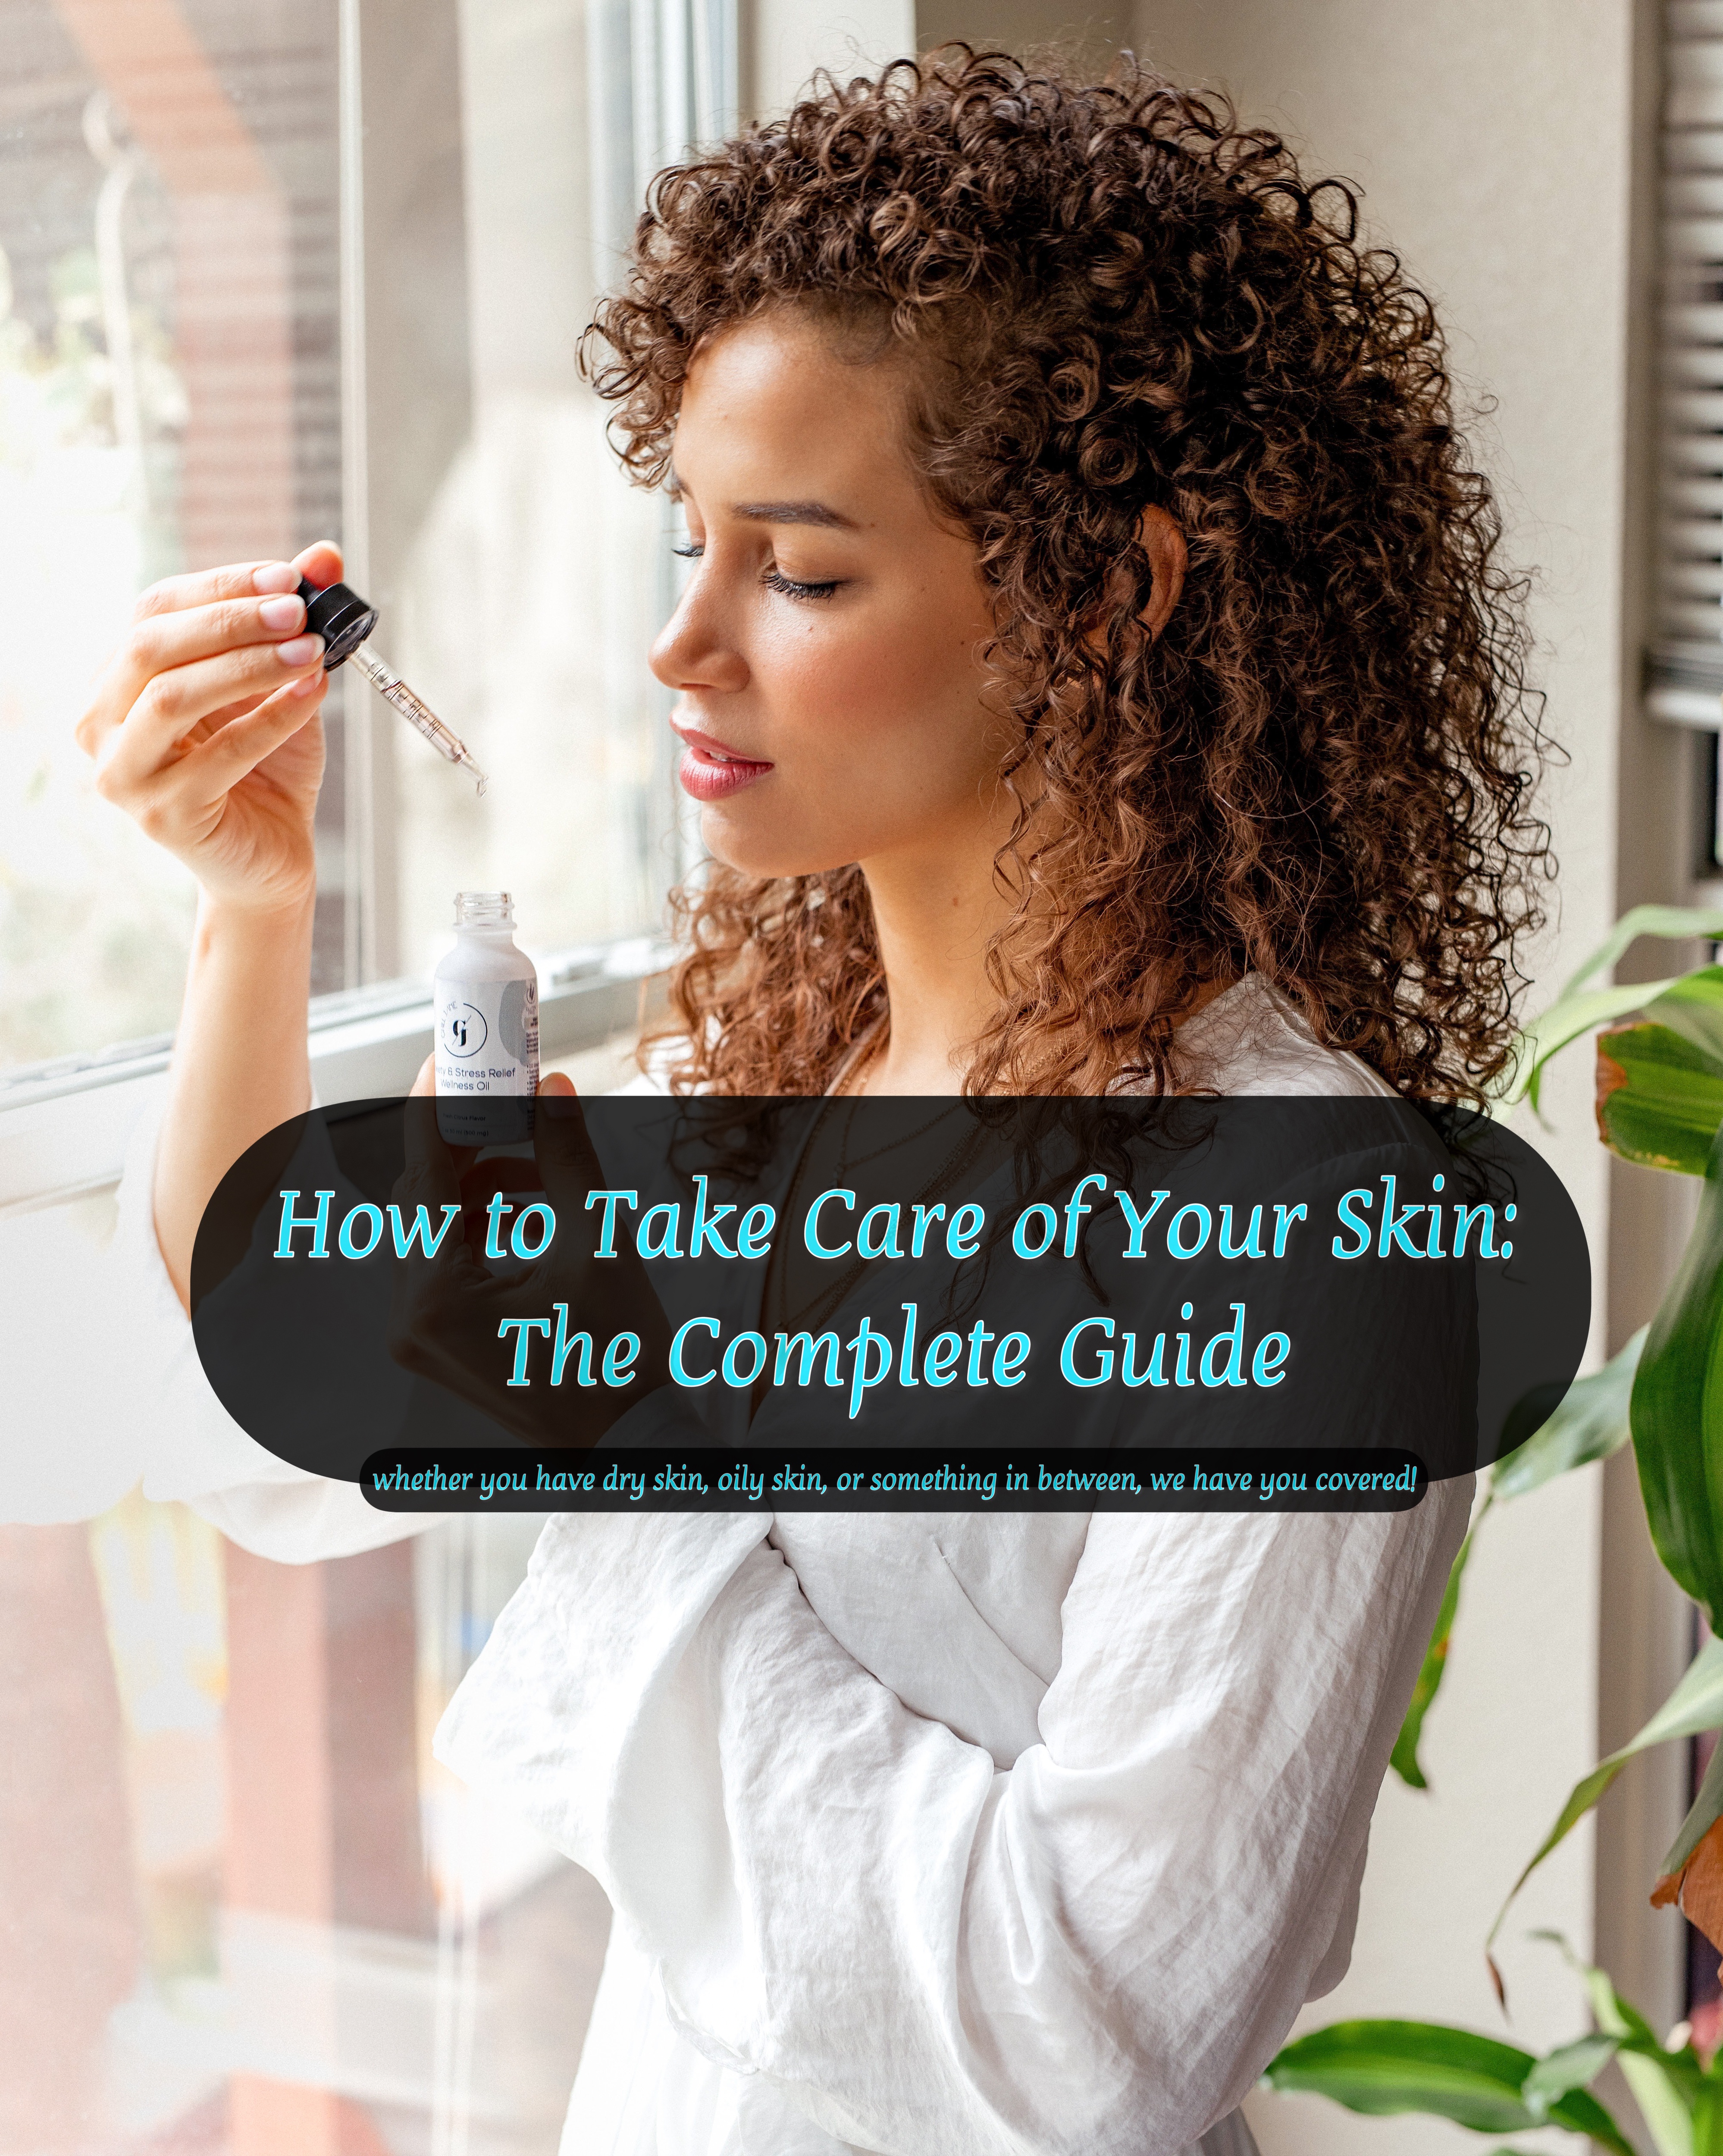 How to Take Care of Your Skin: The Complete Guide